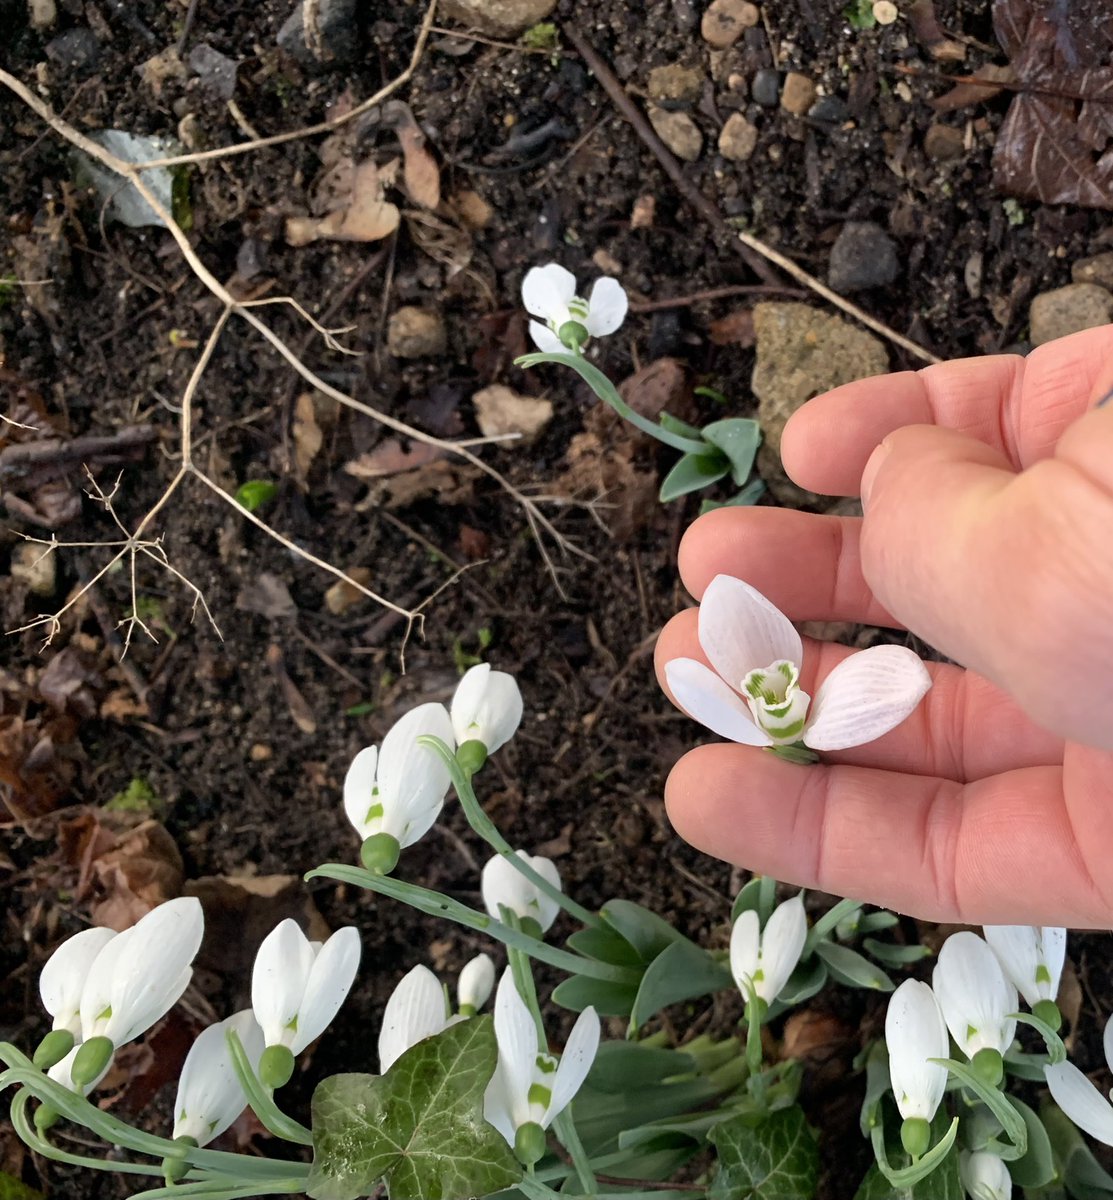 I’m not a Galanthophile like some of you out there BUT this snowdrop at work has beautiful large flowers unlike the other ones here😍
(OH NO!!!  PLEASE DON’T TELL ME THAT THIS IS HOW IT STARTS😳😬)